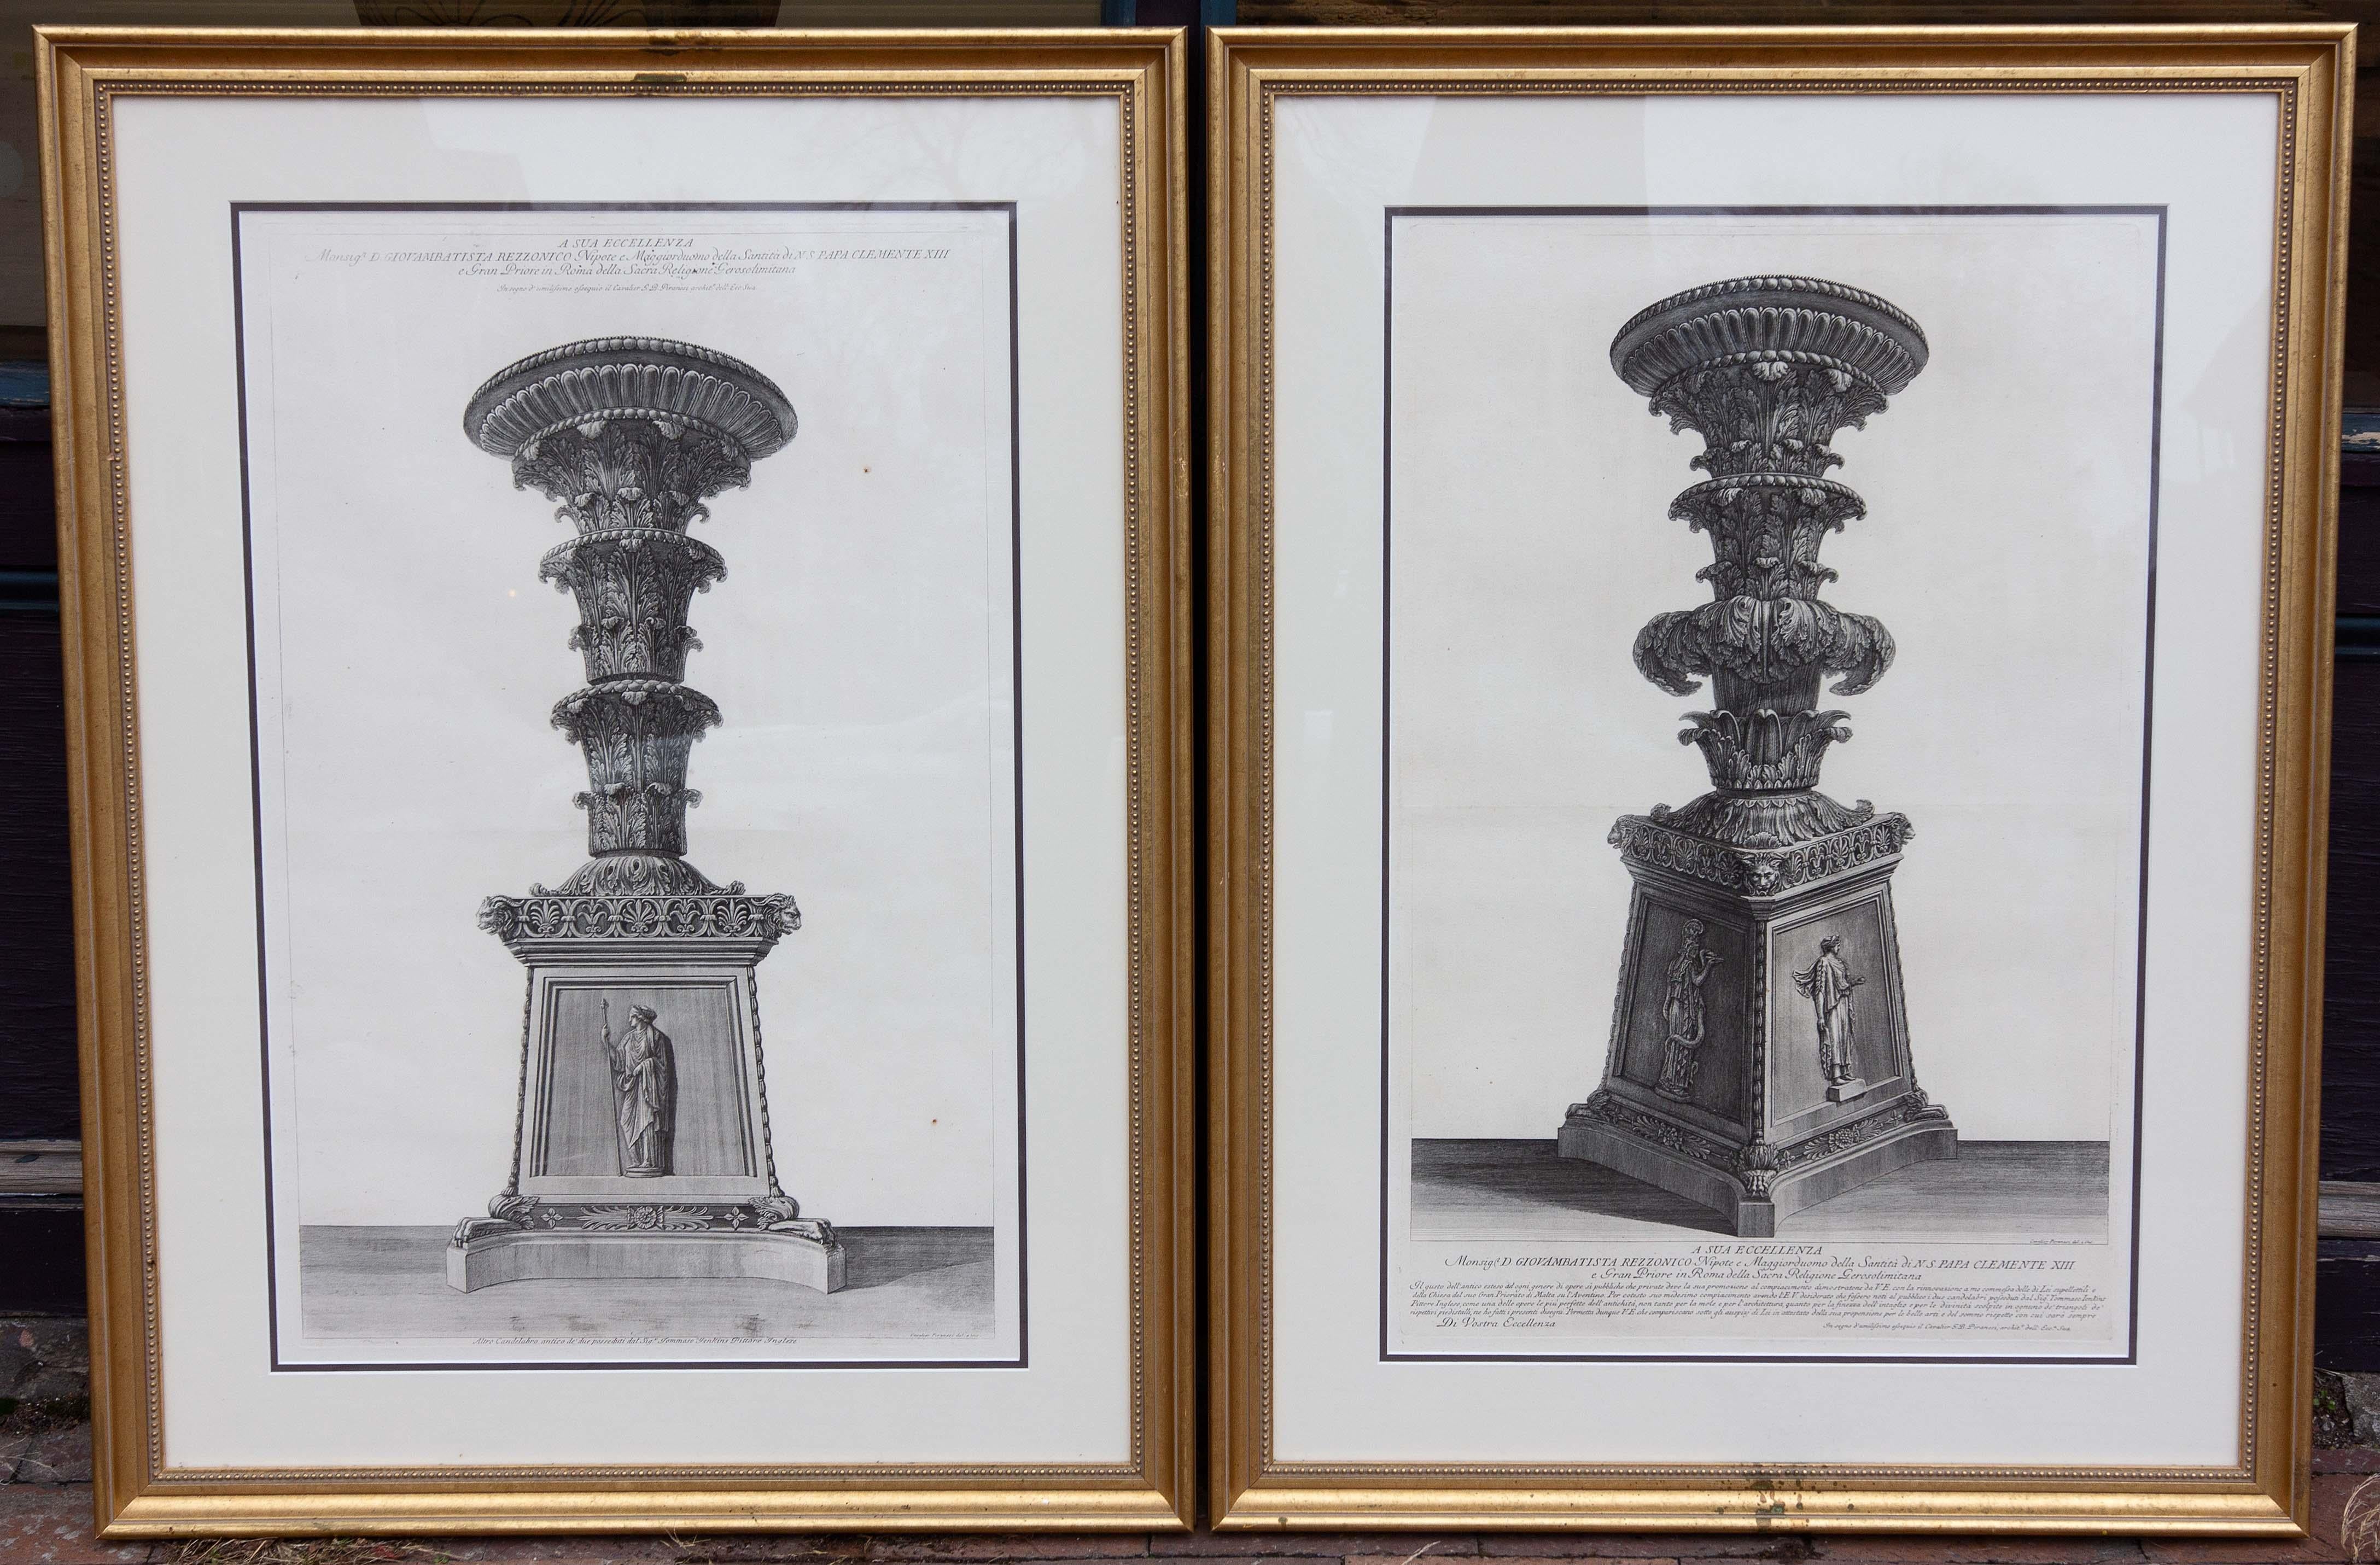 Pair framed antique architectural engravings by Giovanni Battista Piranesi on handmade laid paper. 18th century.